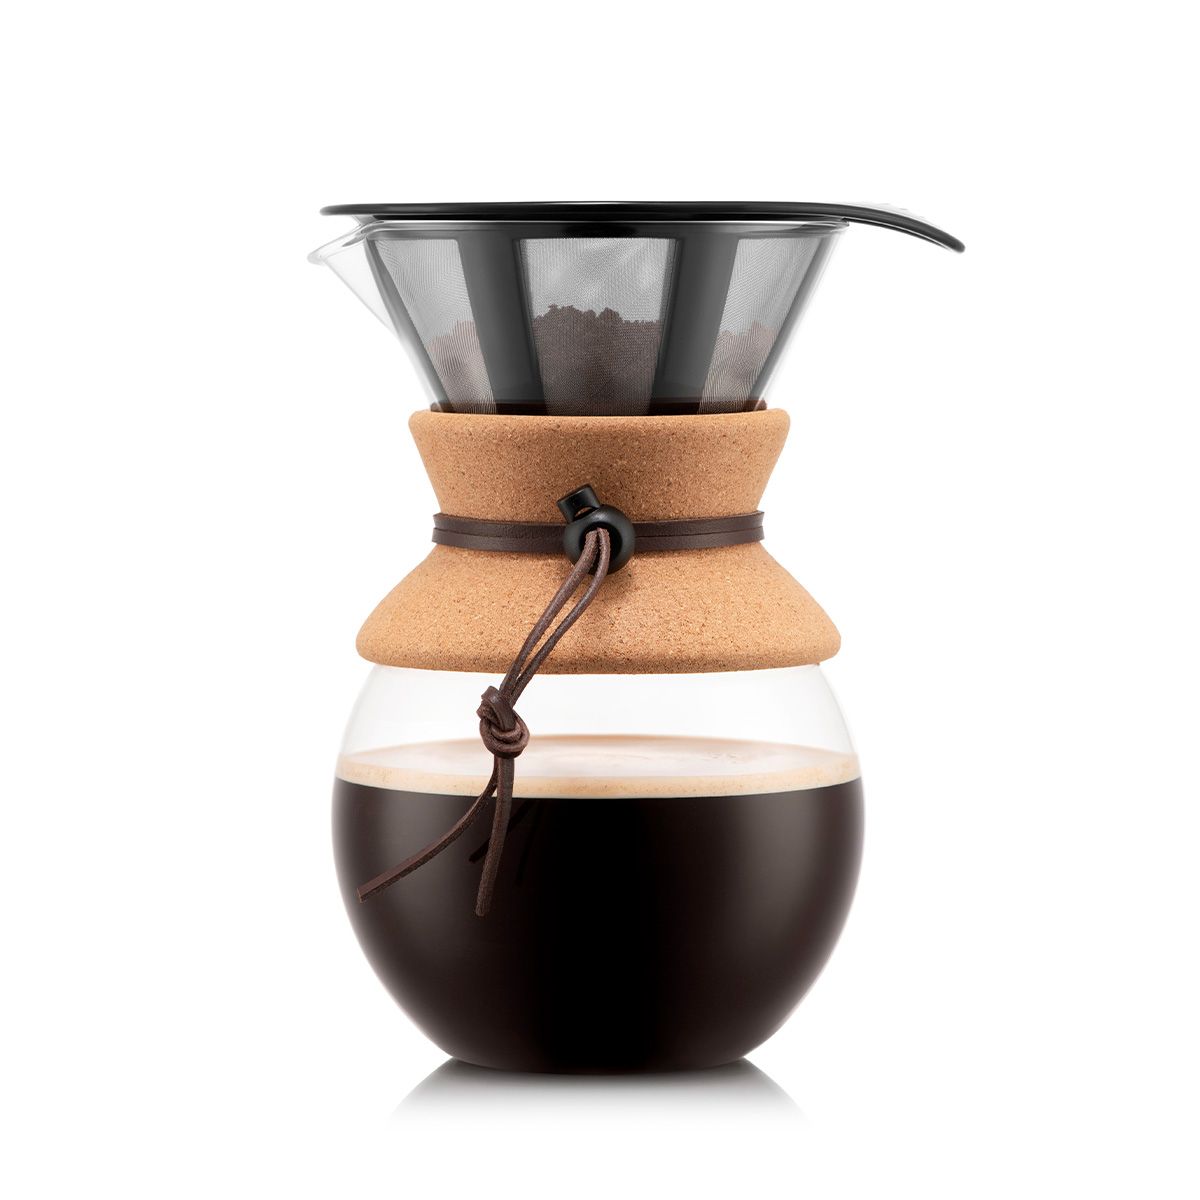 Bodum Pour Over Coffee Maker With Permanent Coffee Filter Cork, 8 Cups